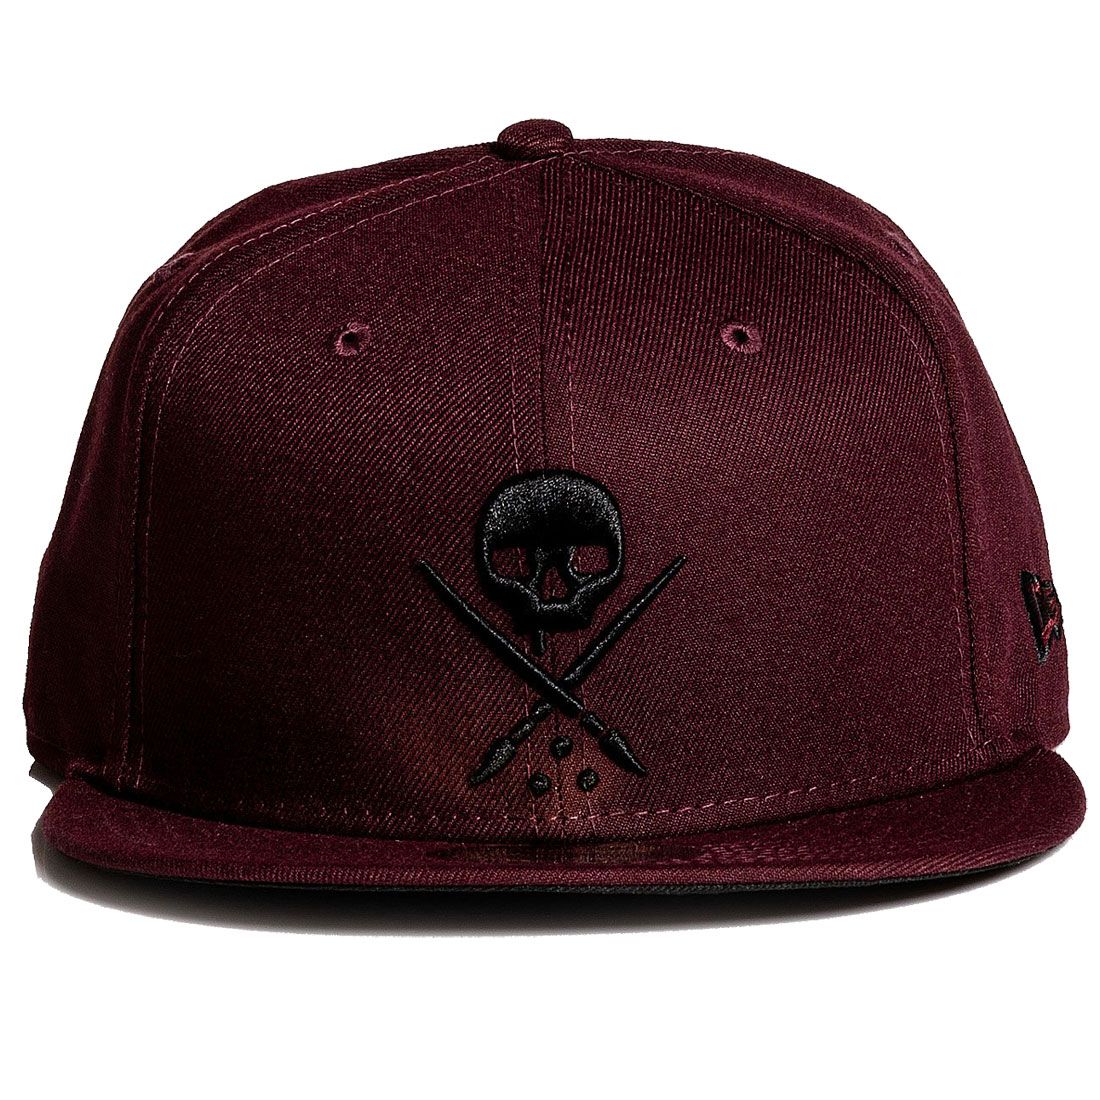 Sullen Badge Maroon Stretched Fitted Cap-Mens Beanies, Hats & Snapback Caps-Scarlett Dawn